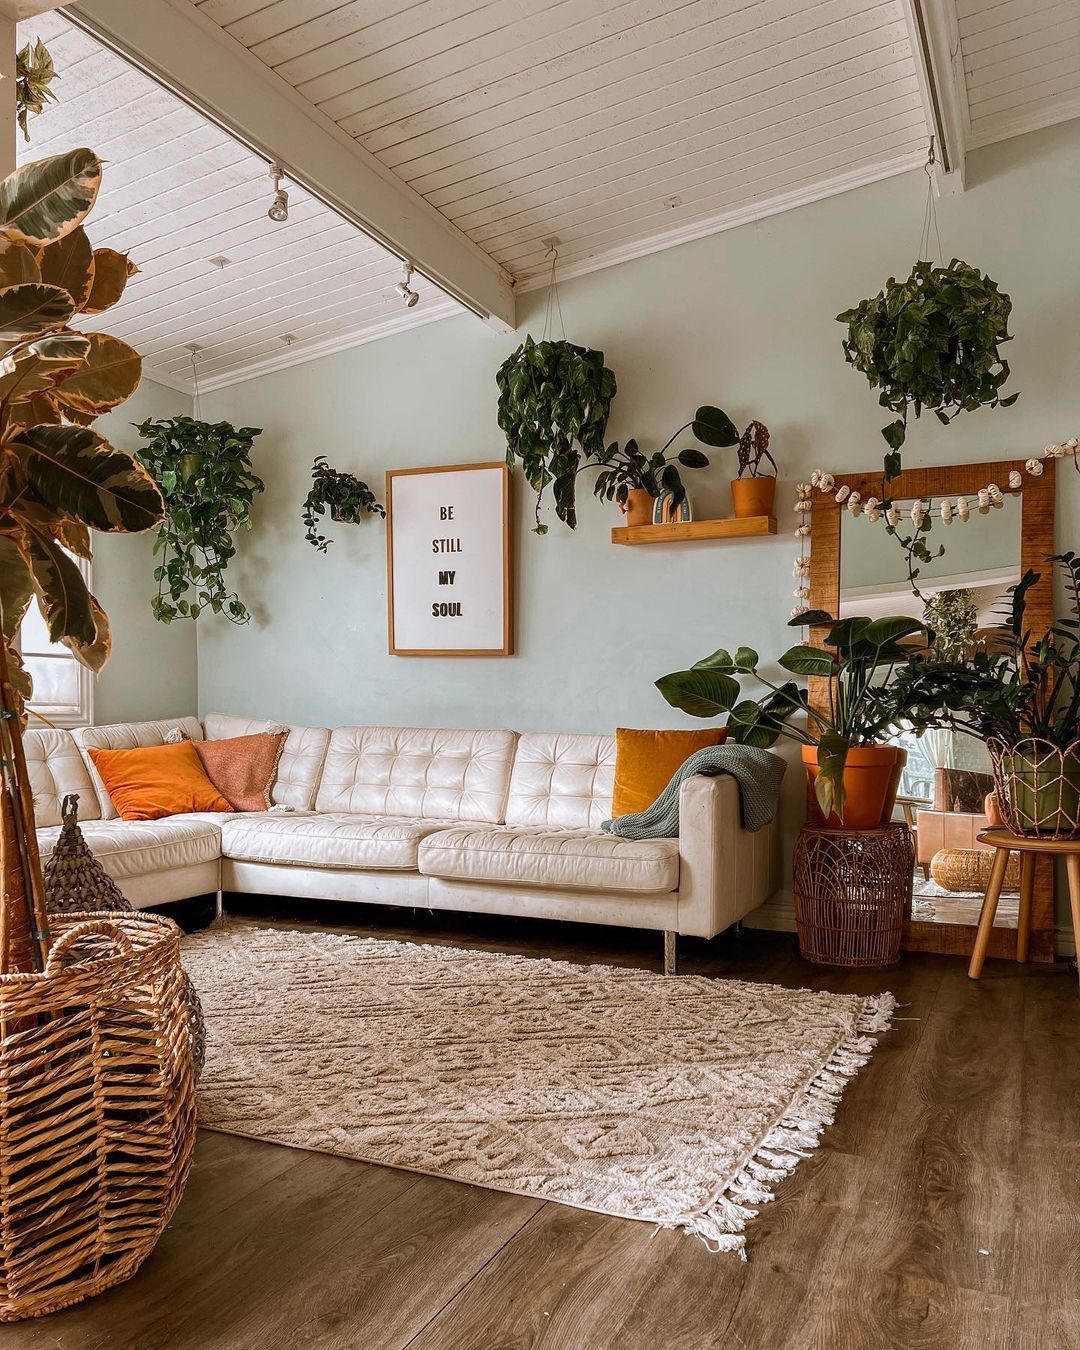 Interior shot of bohemian living room with white couch, white rug, orange accent pillows, and many houseplants | Photo by Instagram user @shannieee